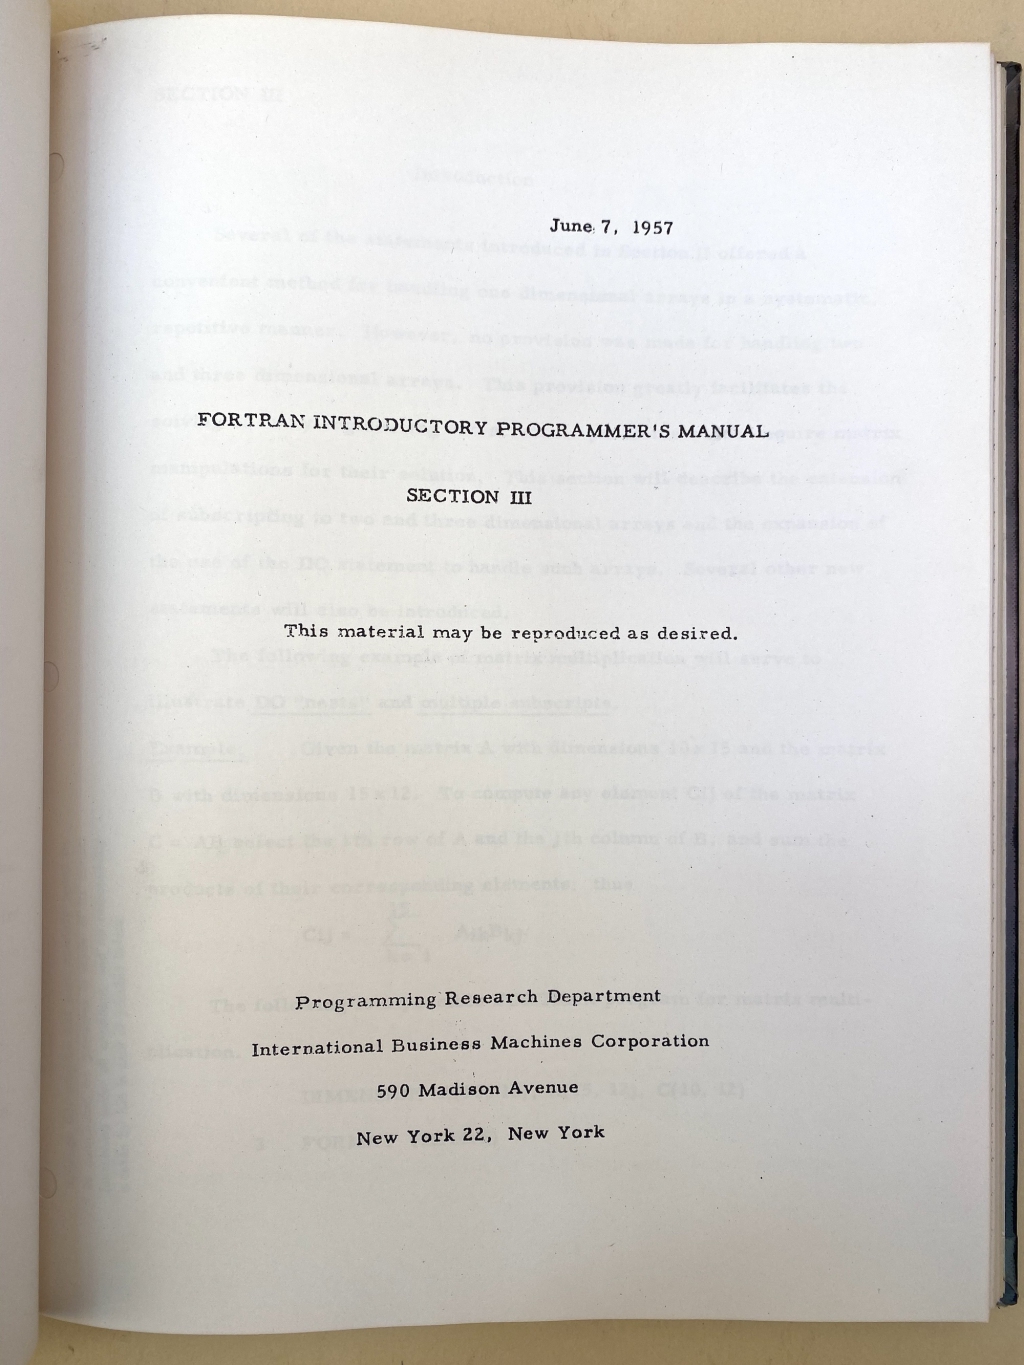 Preliminary FORTRAN manual section III title page